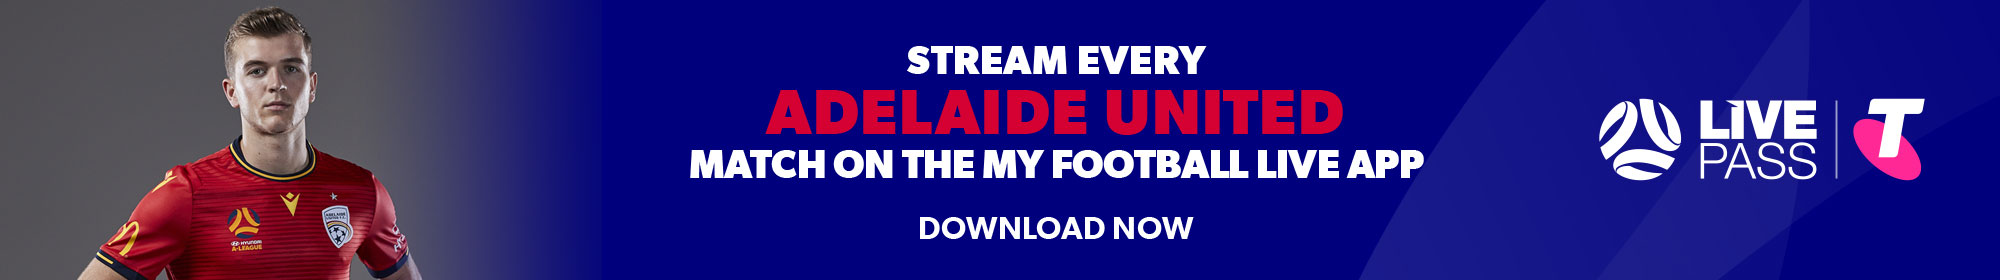 Watch Adelaide United on MyFootball Live